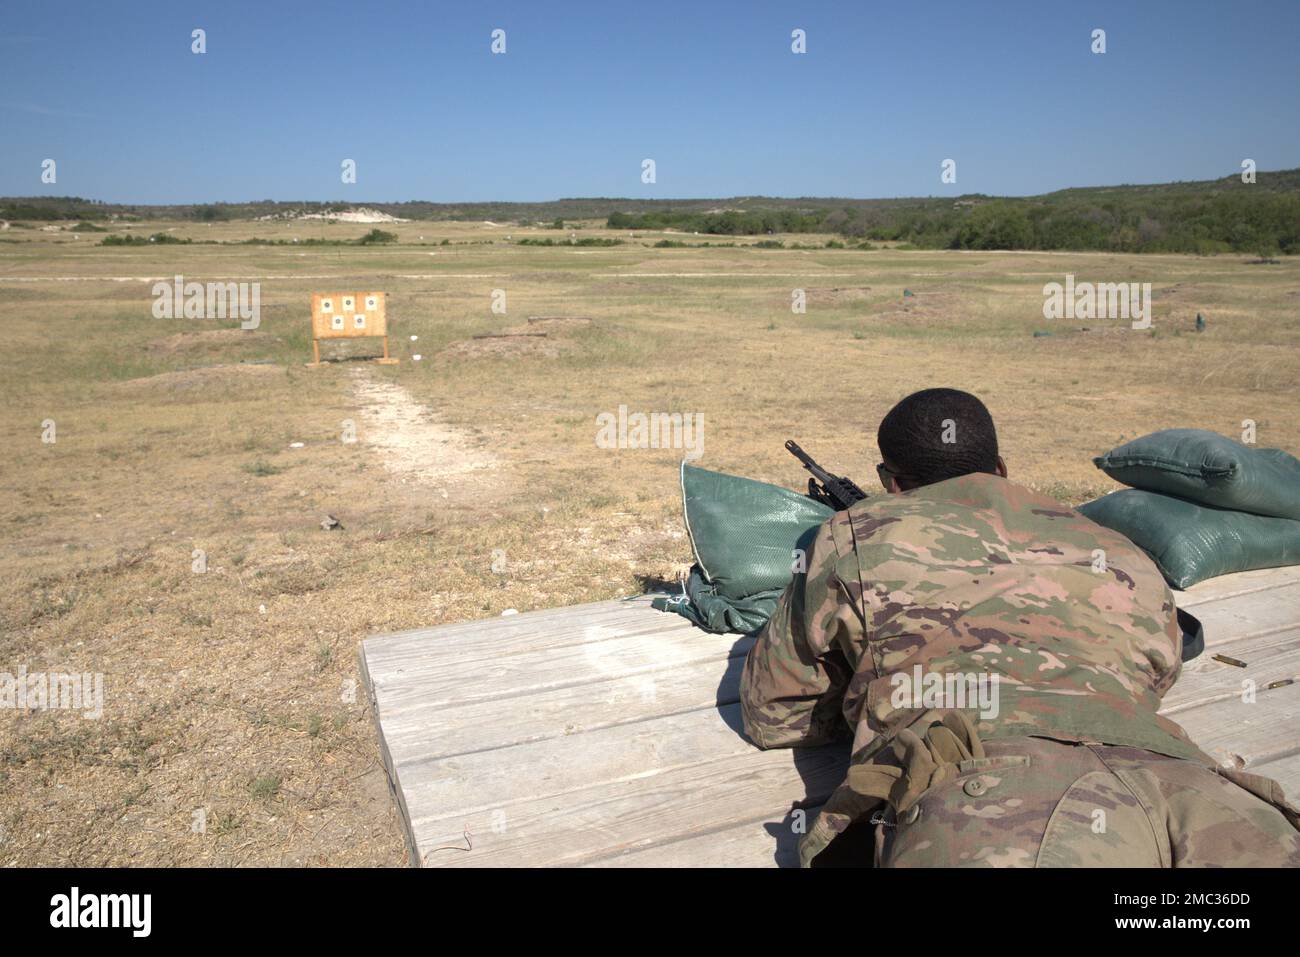 Sgt. Isiah Brown, an Army cable systems installer and maintainer assigned to the 11th Corps Signal Brigade, zeroes his M4 carbine rifle during the III Armored Corps Best Squad Competition 2022 on Fort Hood, Texas, June 24, 2022. Soldiers must align the sights on a weapon to maximize its accuracy during the qualification test. Brown tests the weapon's accuracy by shooting practice targets downrange and adjusts his weapon if he needs to, depending on how many rounds hit the target. The III Armored Corps pulled only the best from across its divisions and separate brigade’s to compete in this year Stock Photo